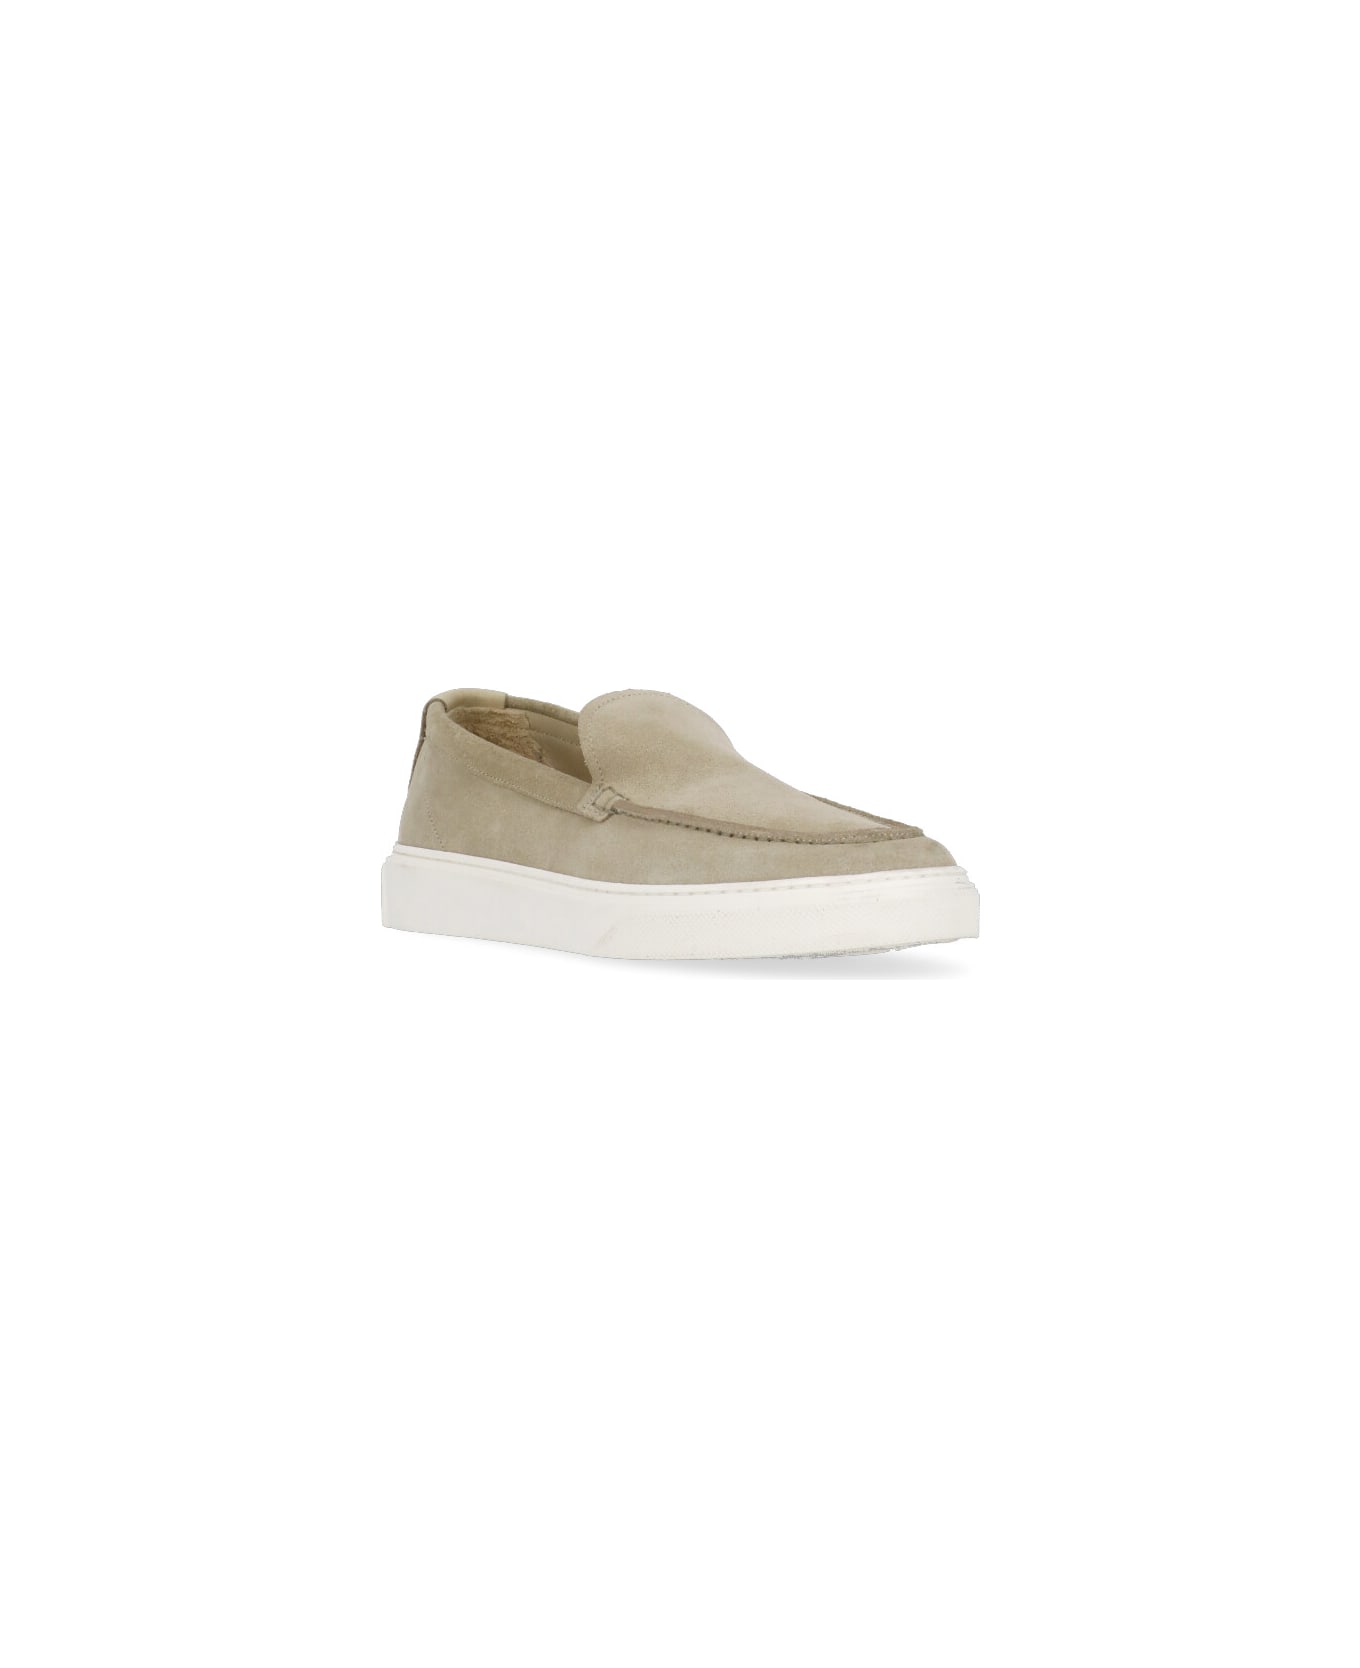 Woolrich Suede Leather Loafers - Beige